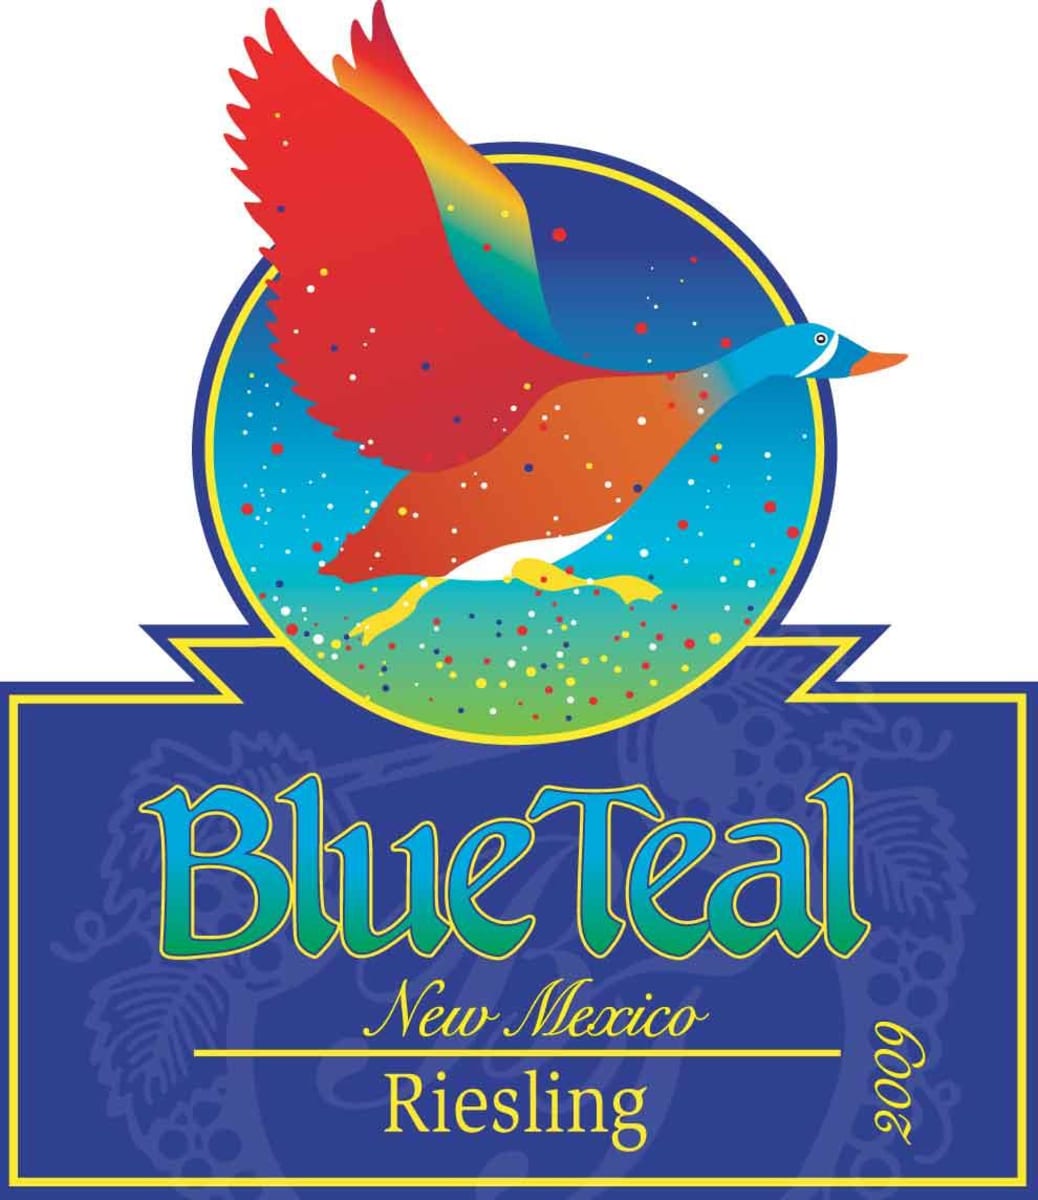 St. Clair Blue Teal Vineyards Riesling 2009 Front Label